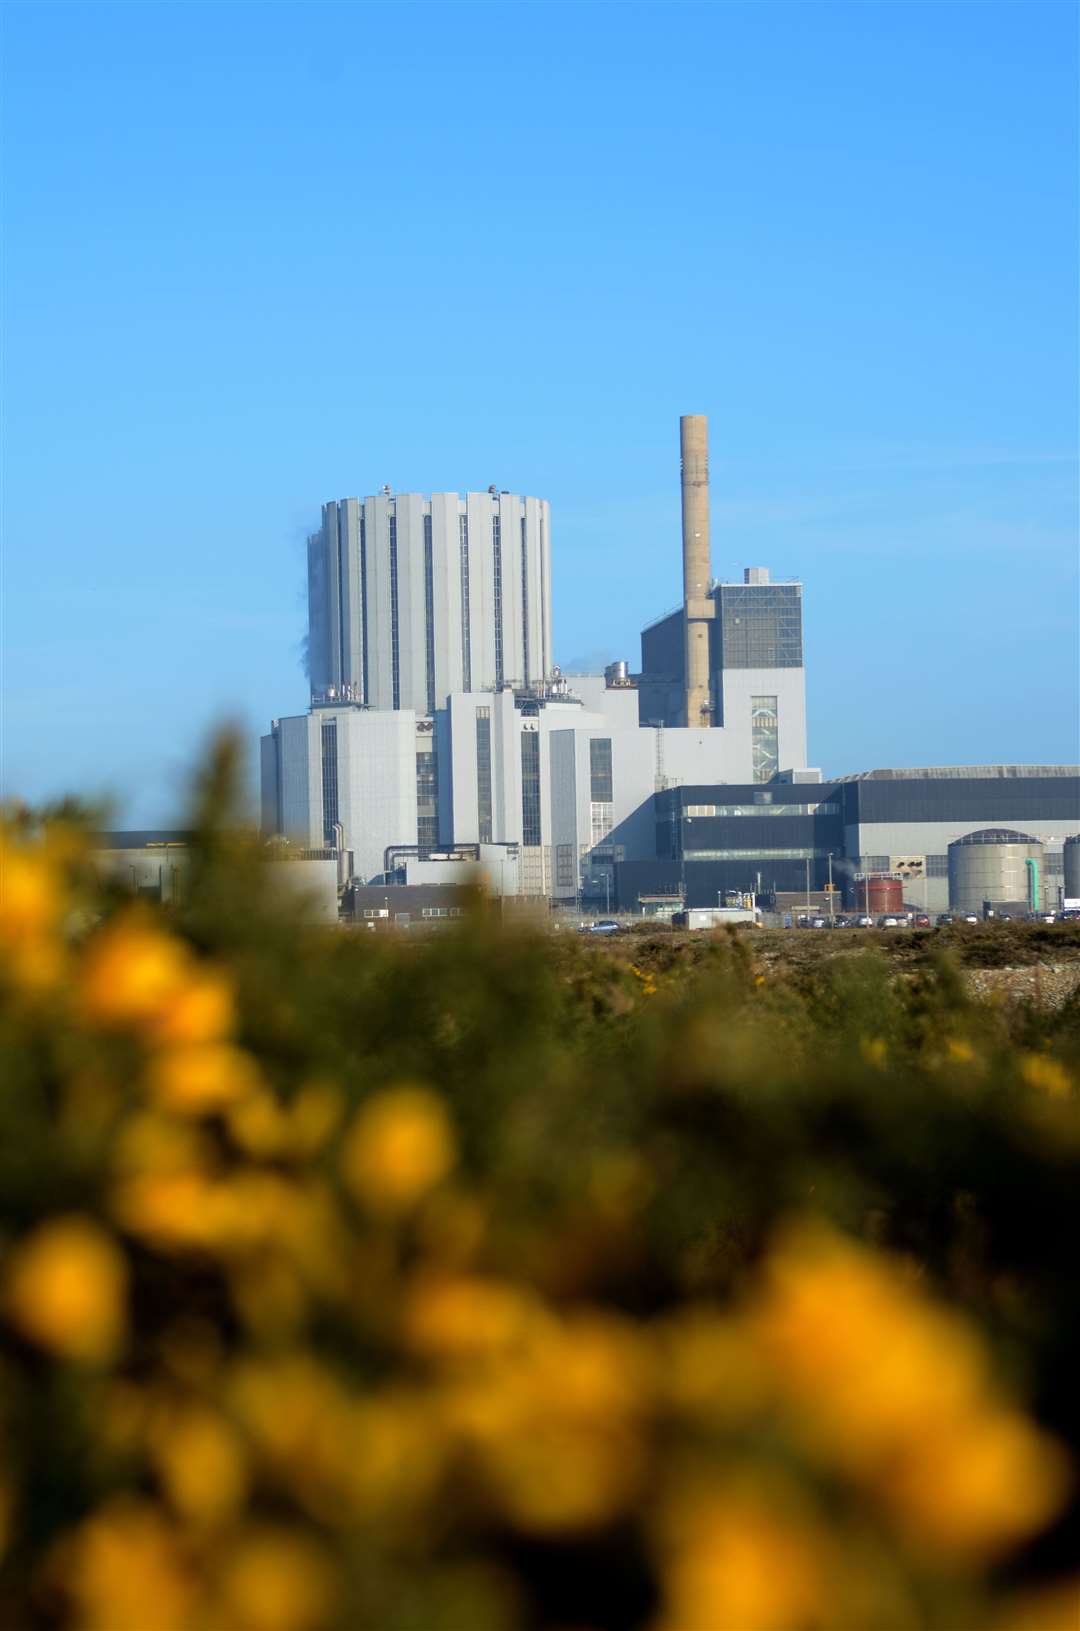 Dungeness B nuclear power station. (21487811)